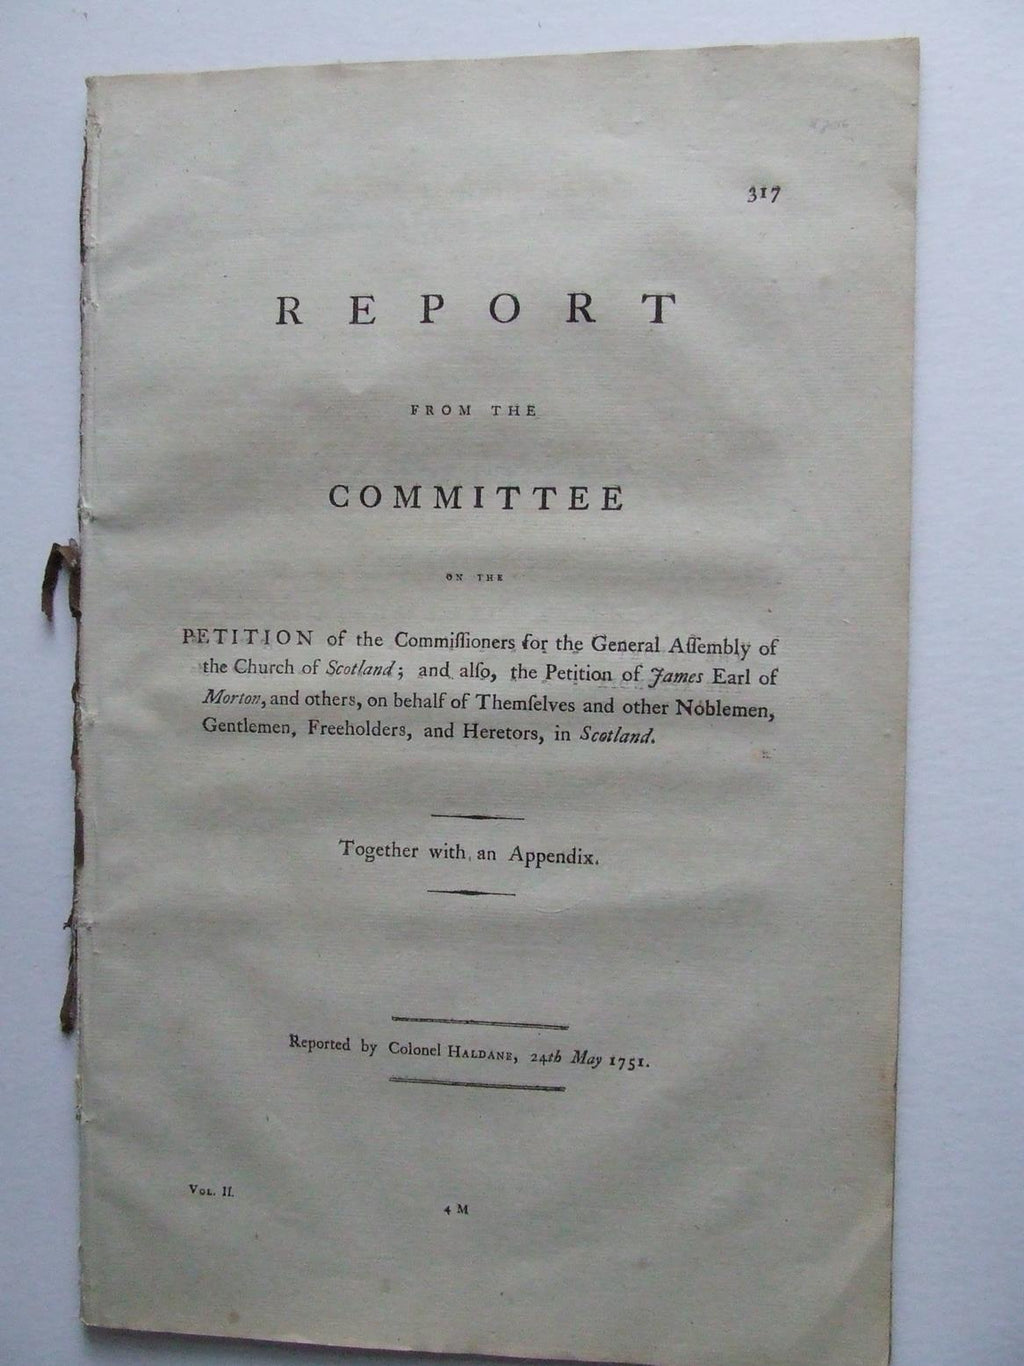 Report from the Committee to whom the petition of the Commissioners for the General Assembly of the Church of Scotland